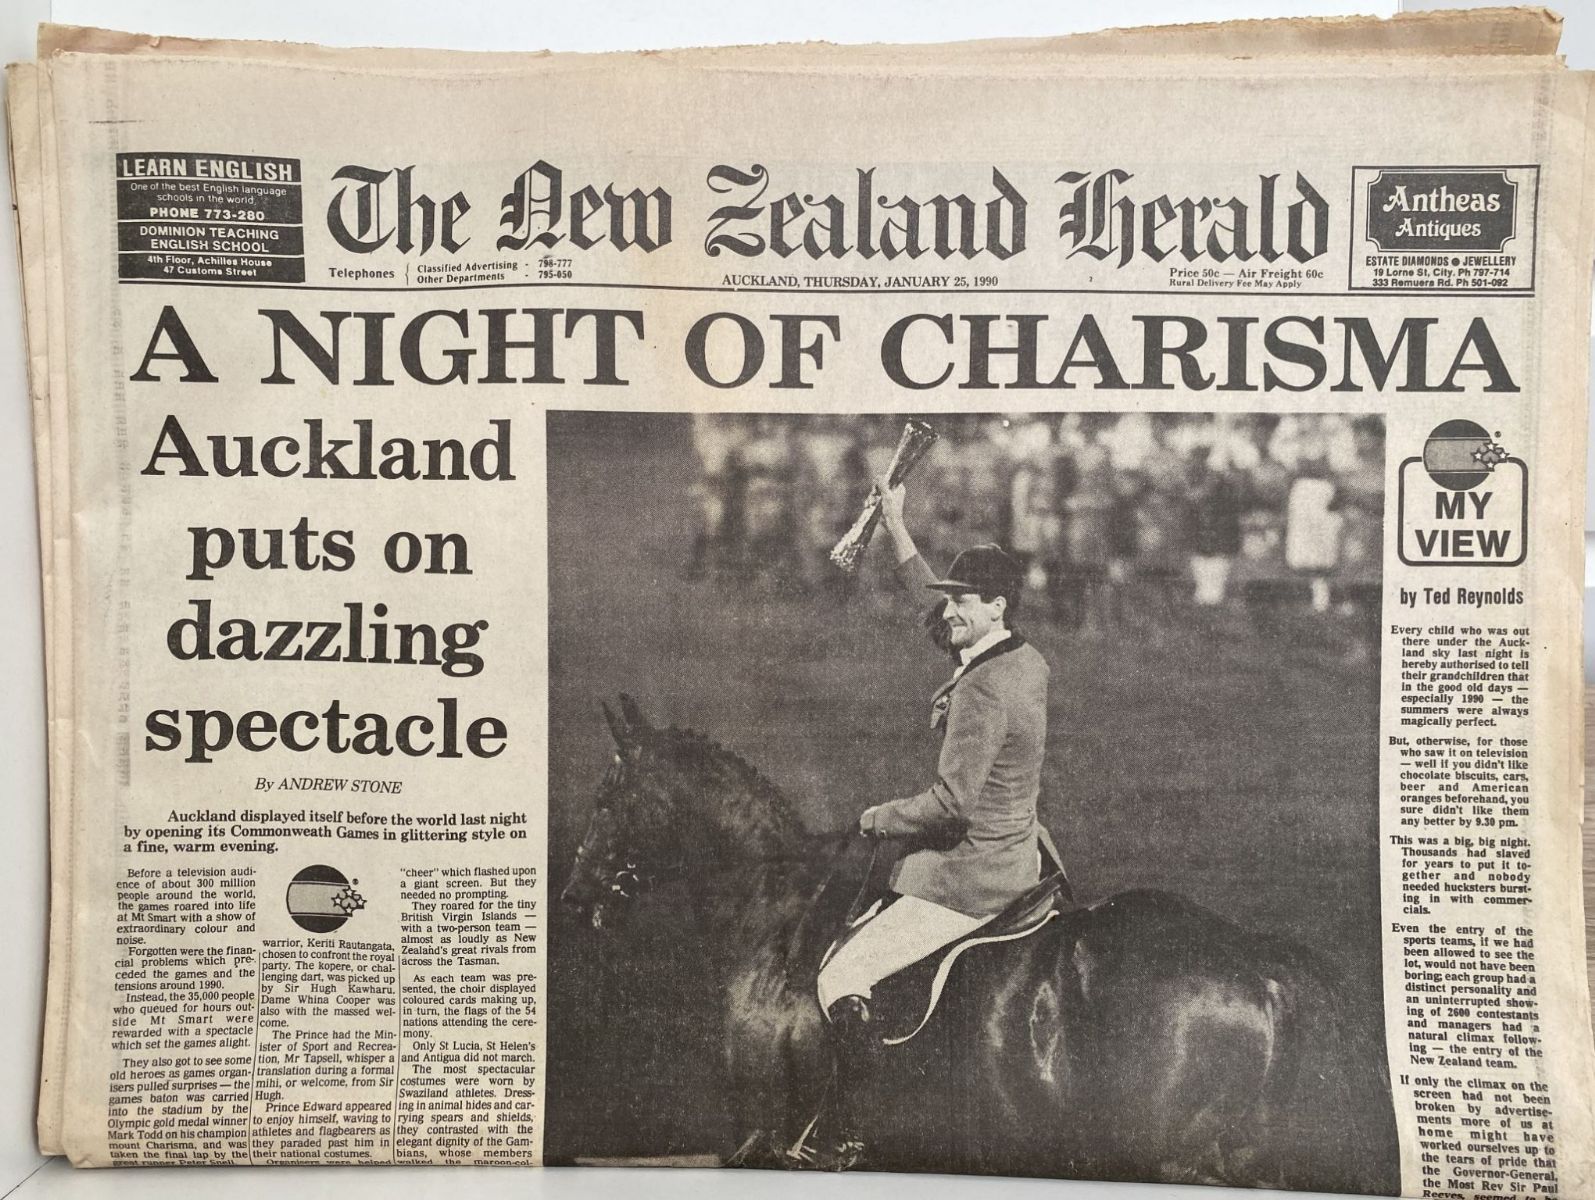 OLD NEWSPAPER: The New Zealand Herald, 25th January 1990 - Commonwealth Games